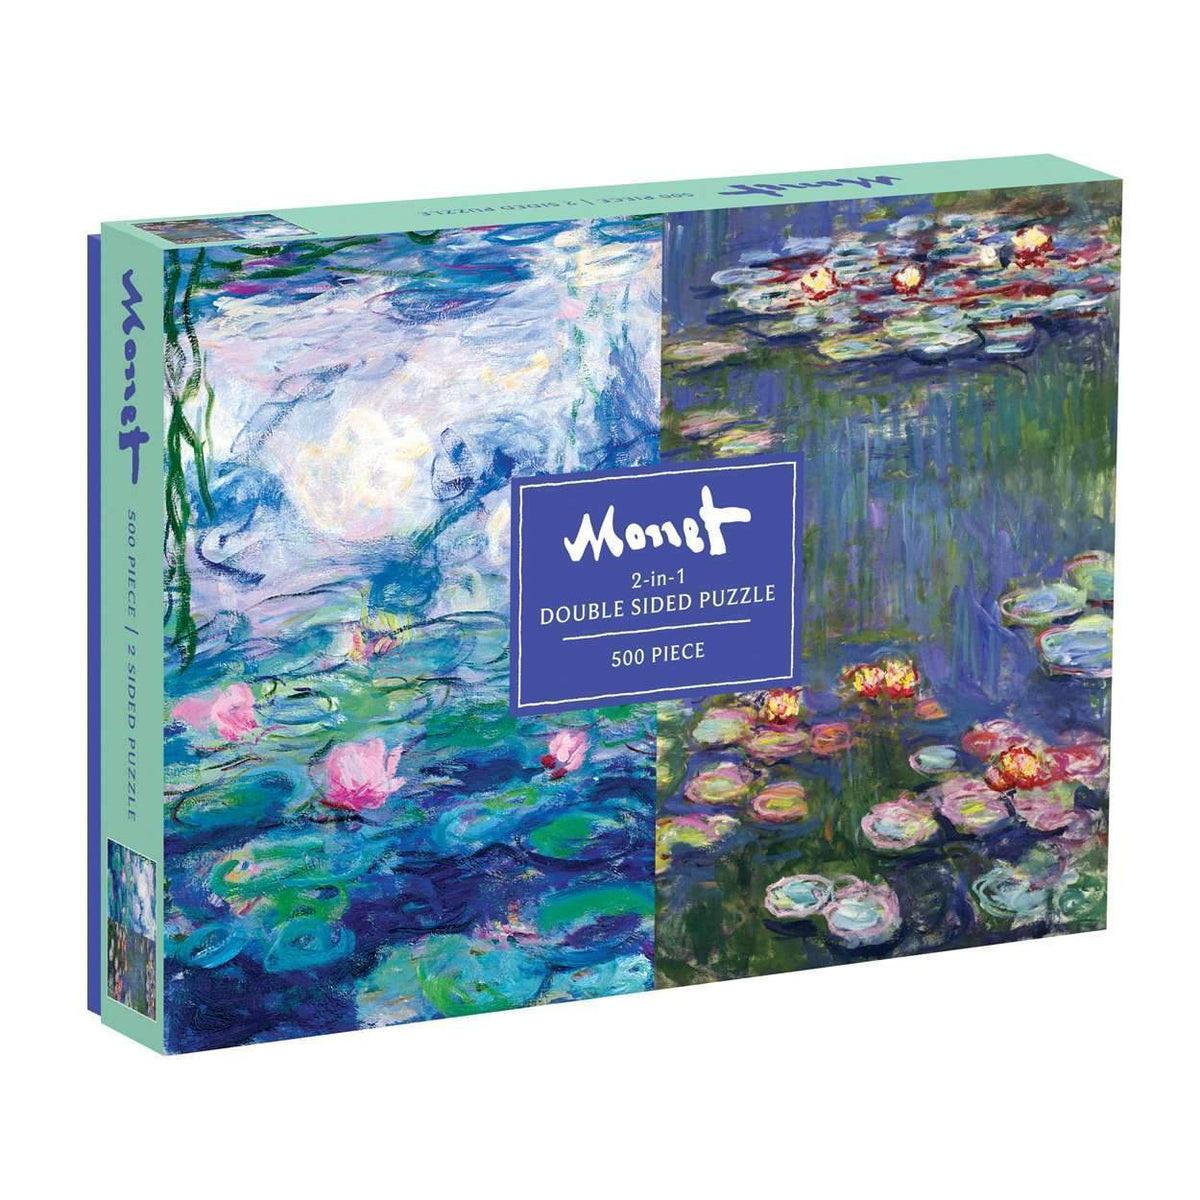 Monet 500 Piece Double Sided Puzzle 2-sided 500 Piece Puzzles Galison 